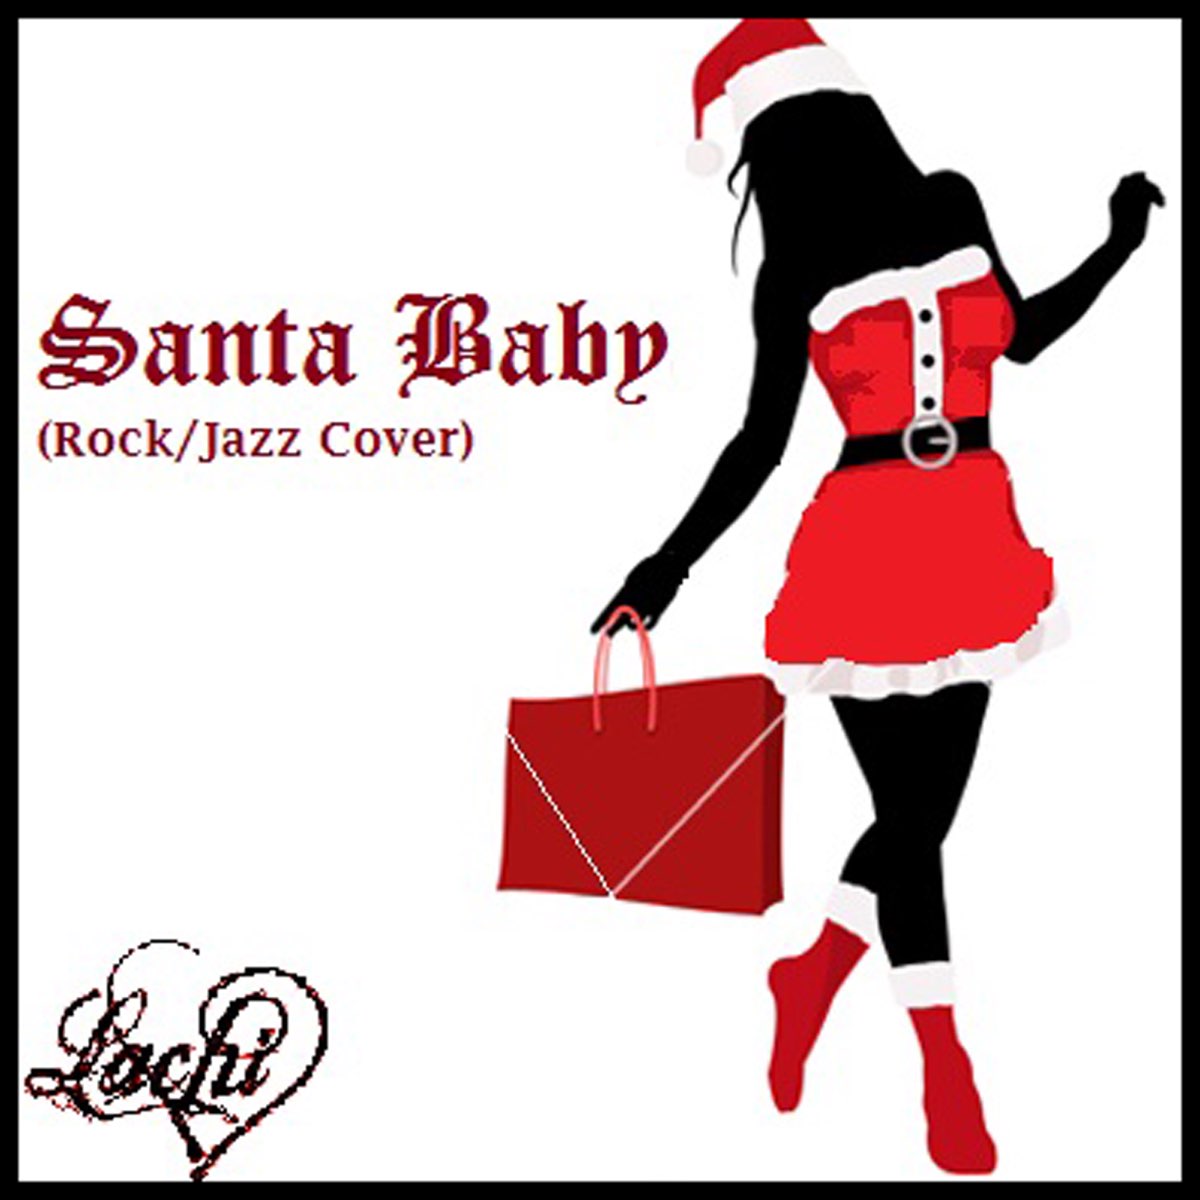 Santa Baby (Rock-Jazz Cover) - Single by Lachi on iTunes